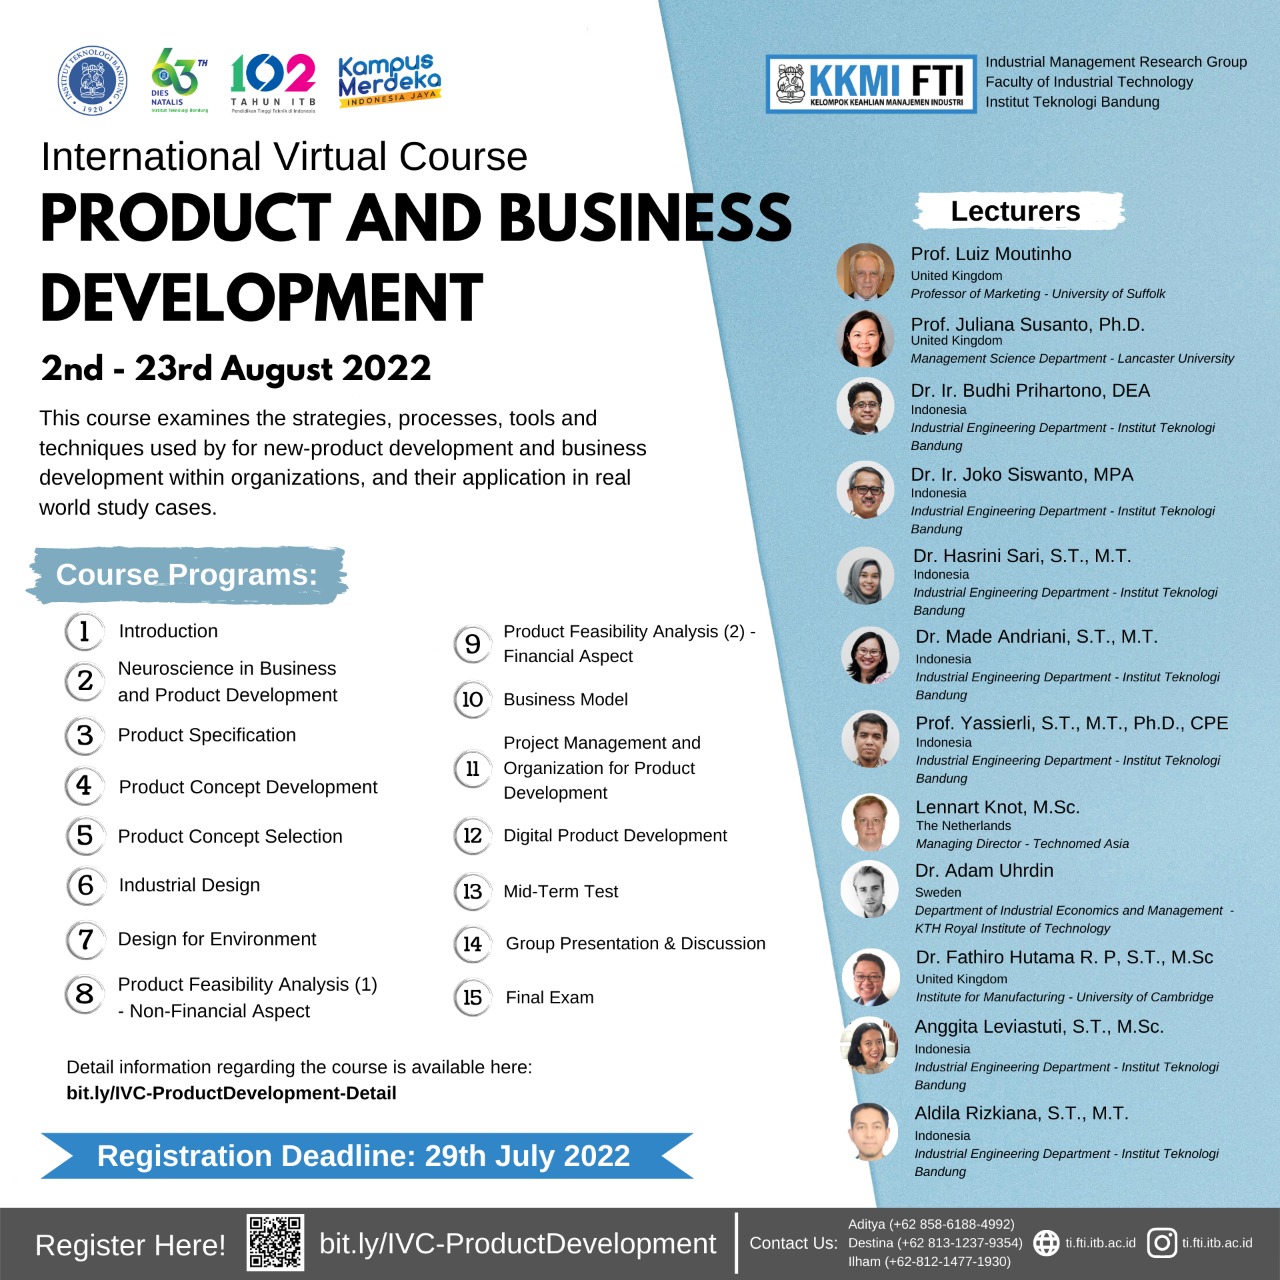 International Virtual Course “Product and Business Development”